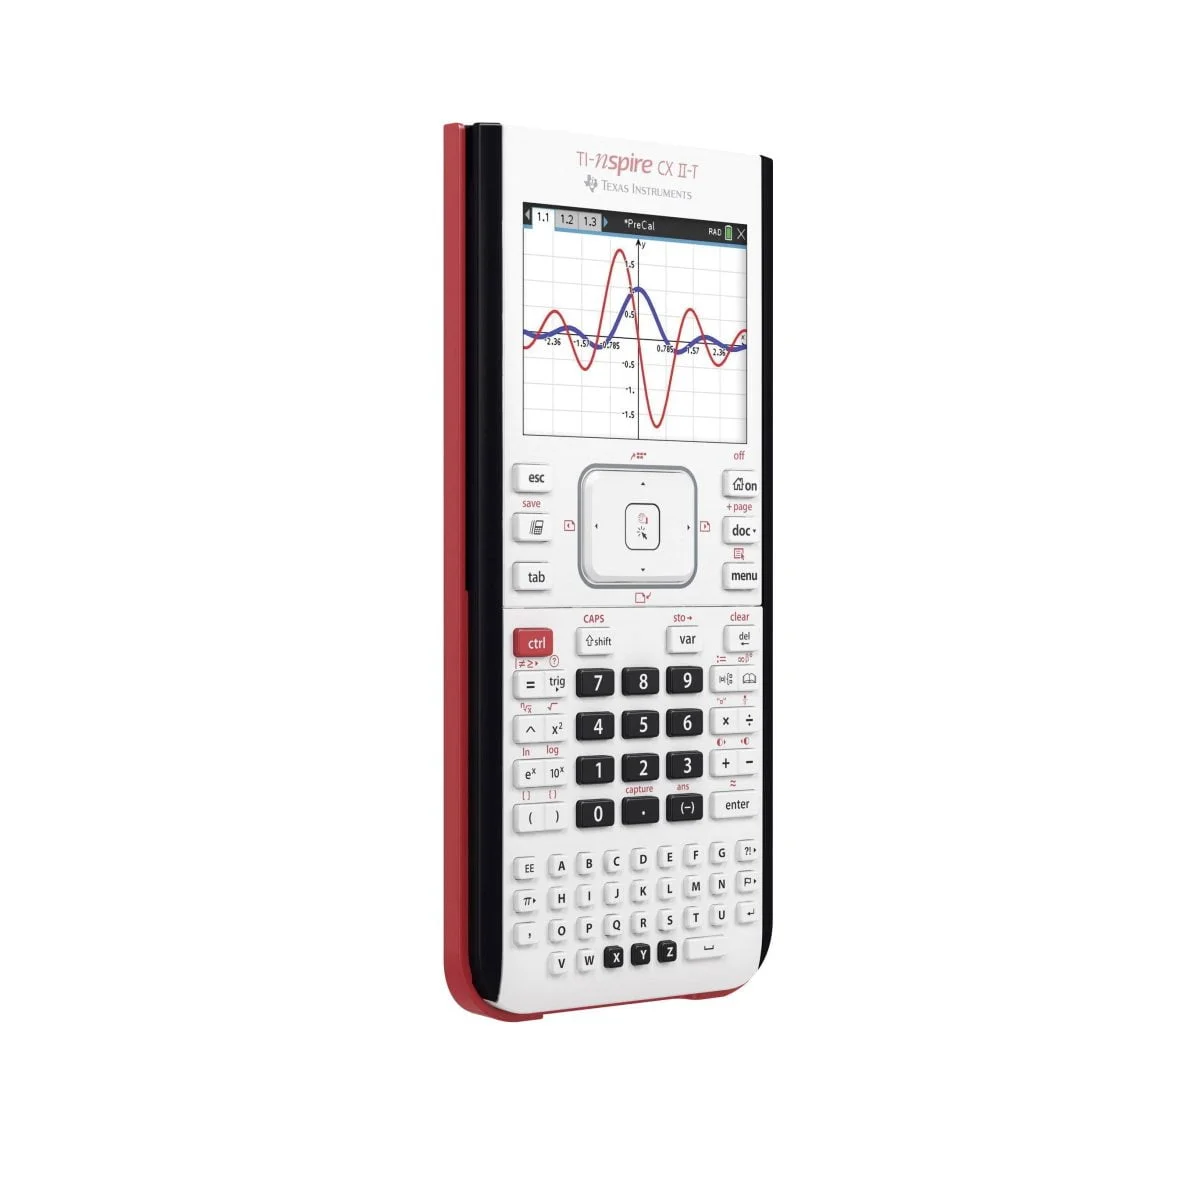 Texas Instruments Cx Ii-T Graphing Calculator